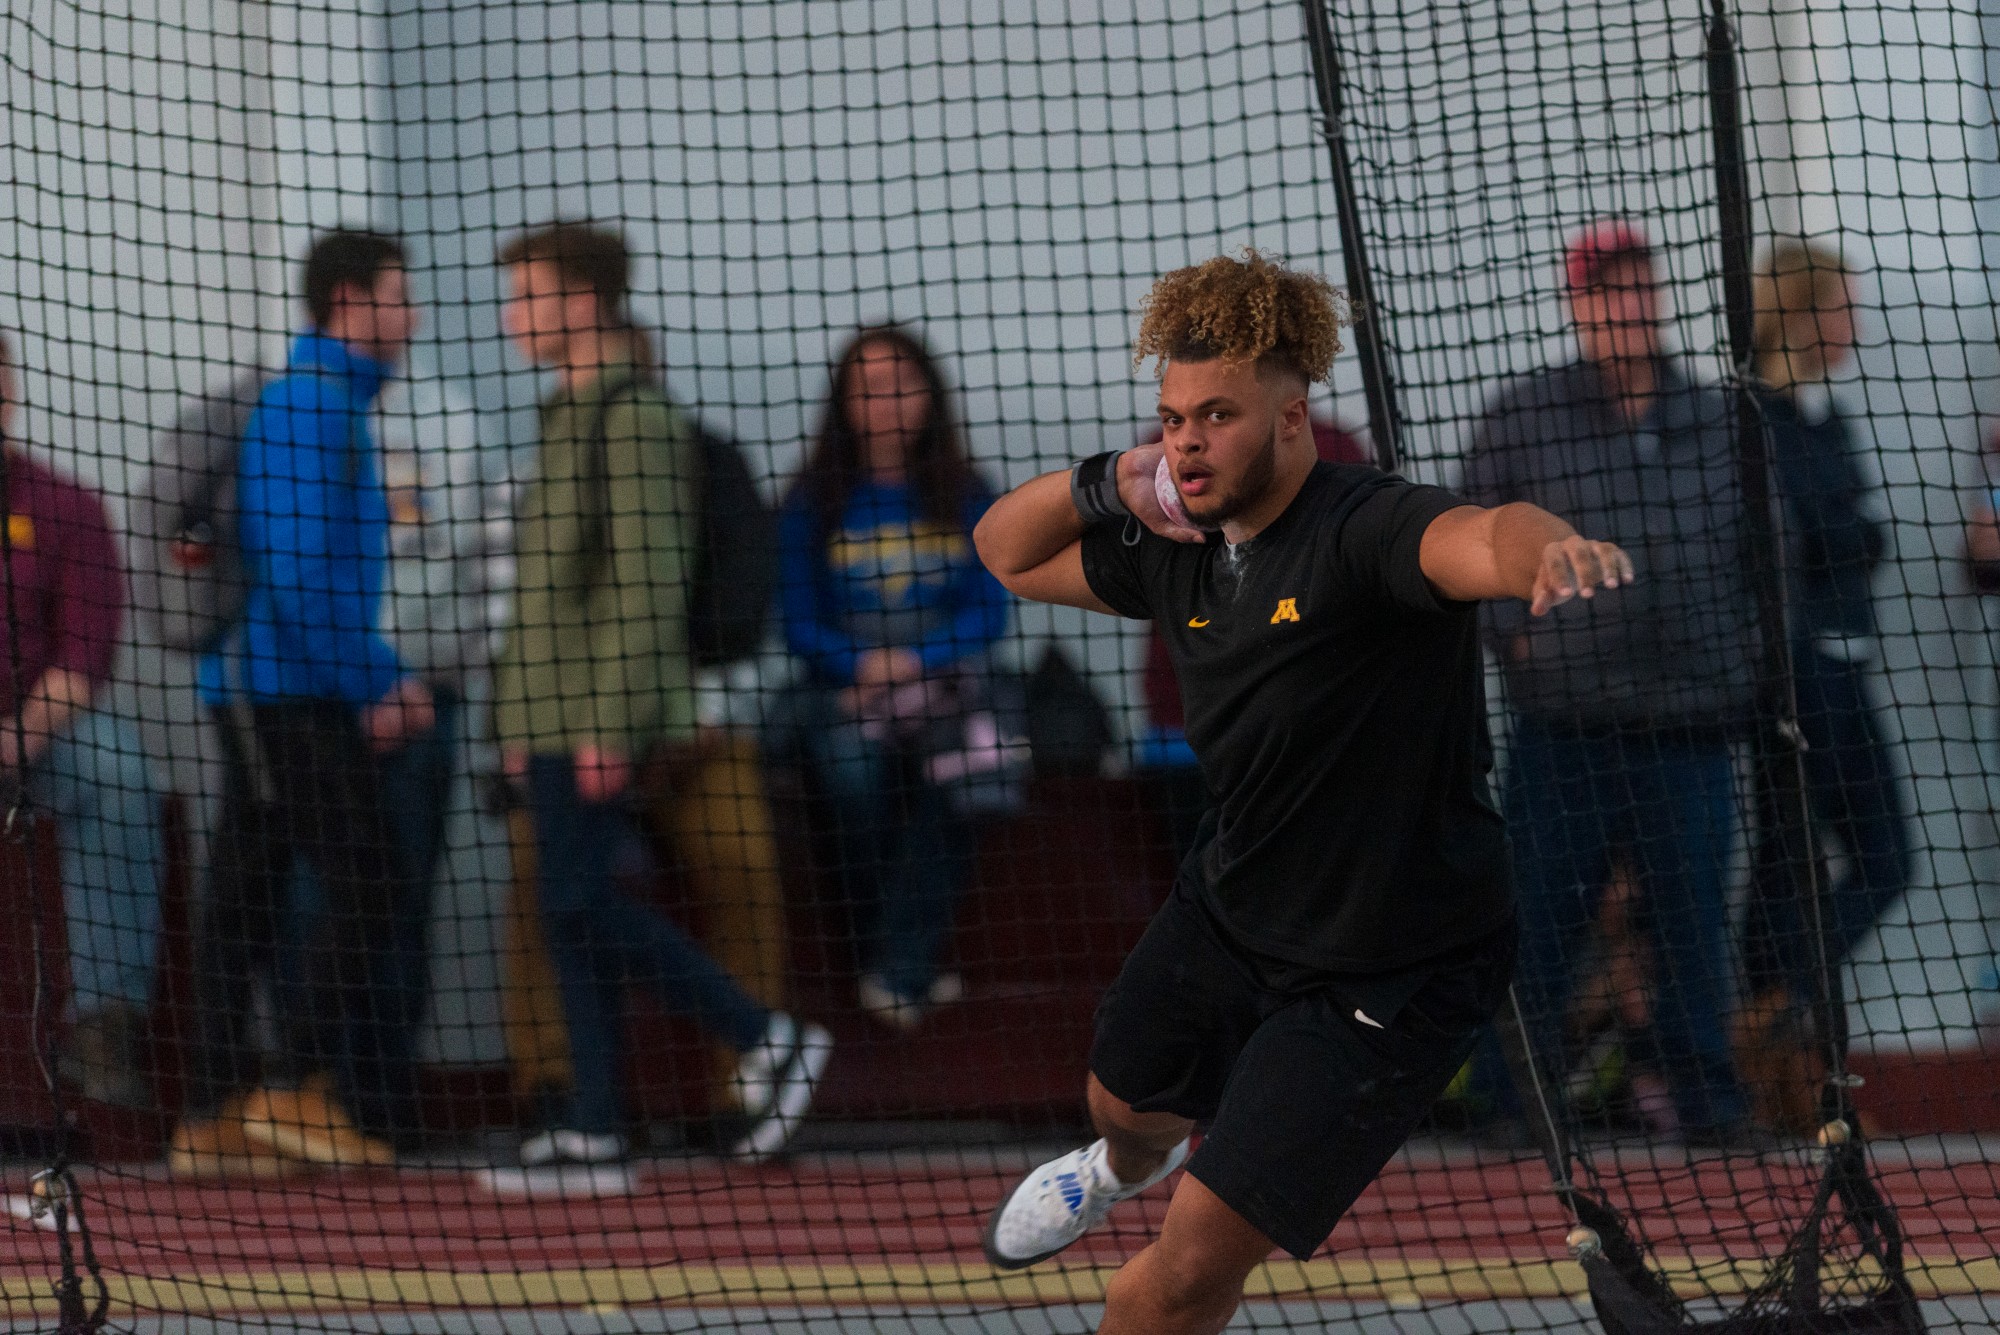 Gophers Freshman Kyle Atkinson competes in the shot put at the Minnesota Cold Classic at the University of Minnesota Fieldhouse on Friday, Feb. 21.